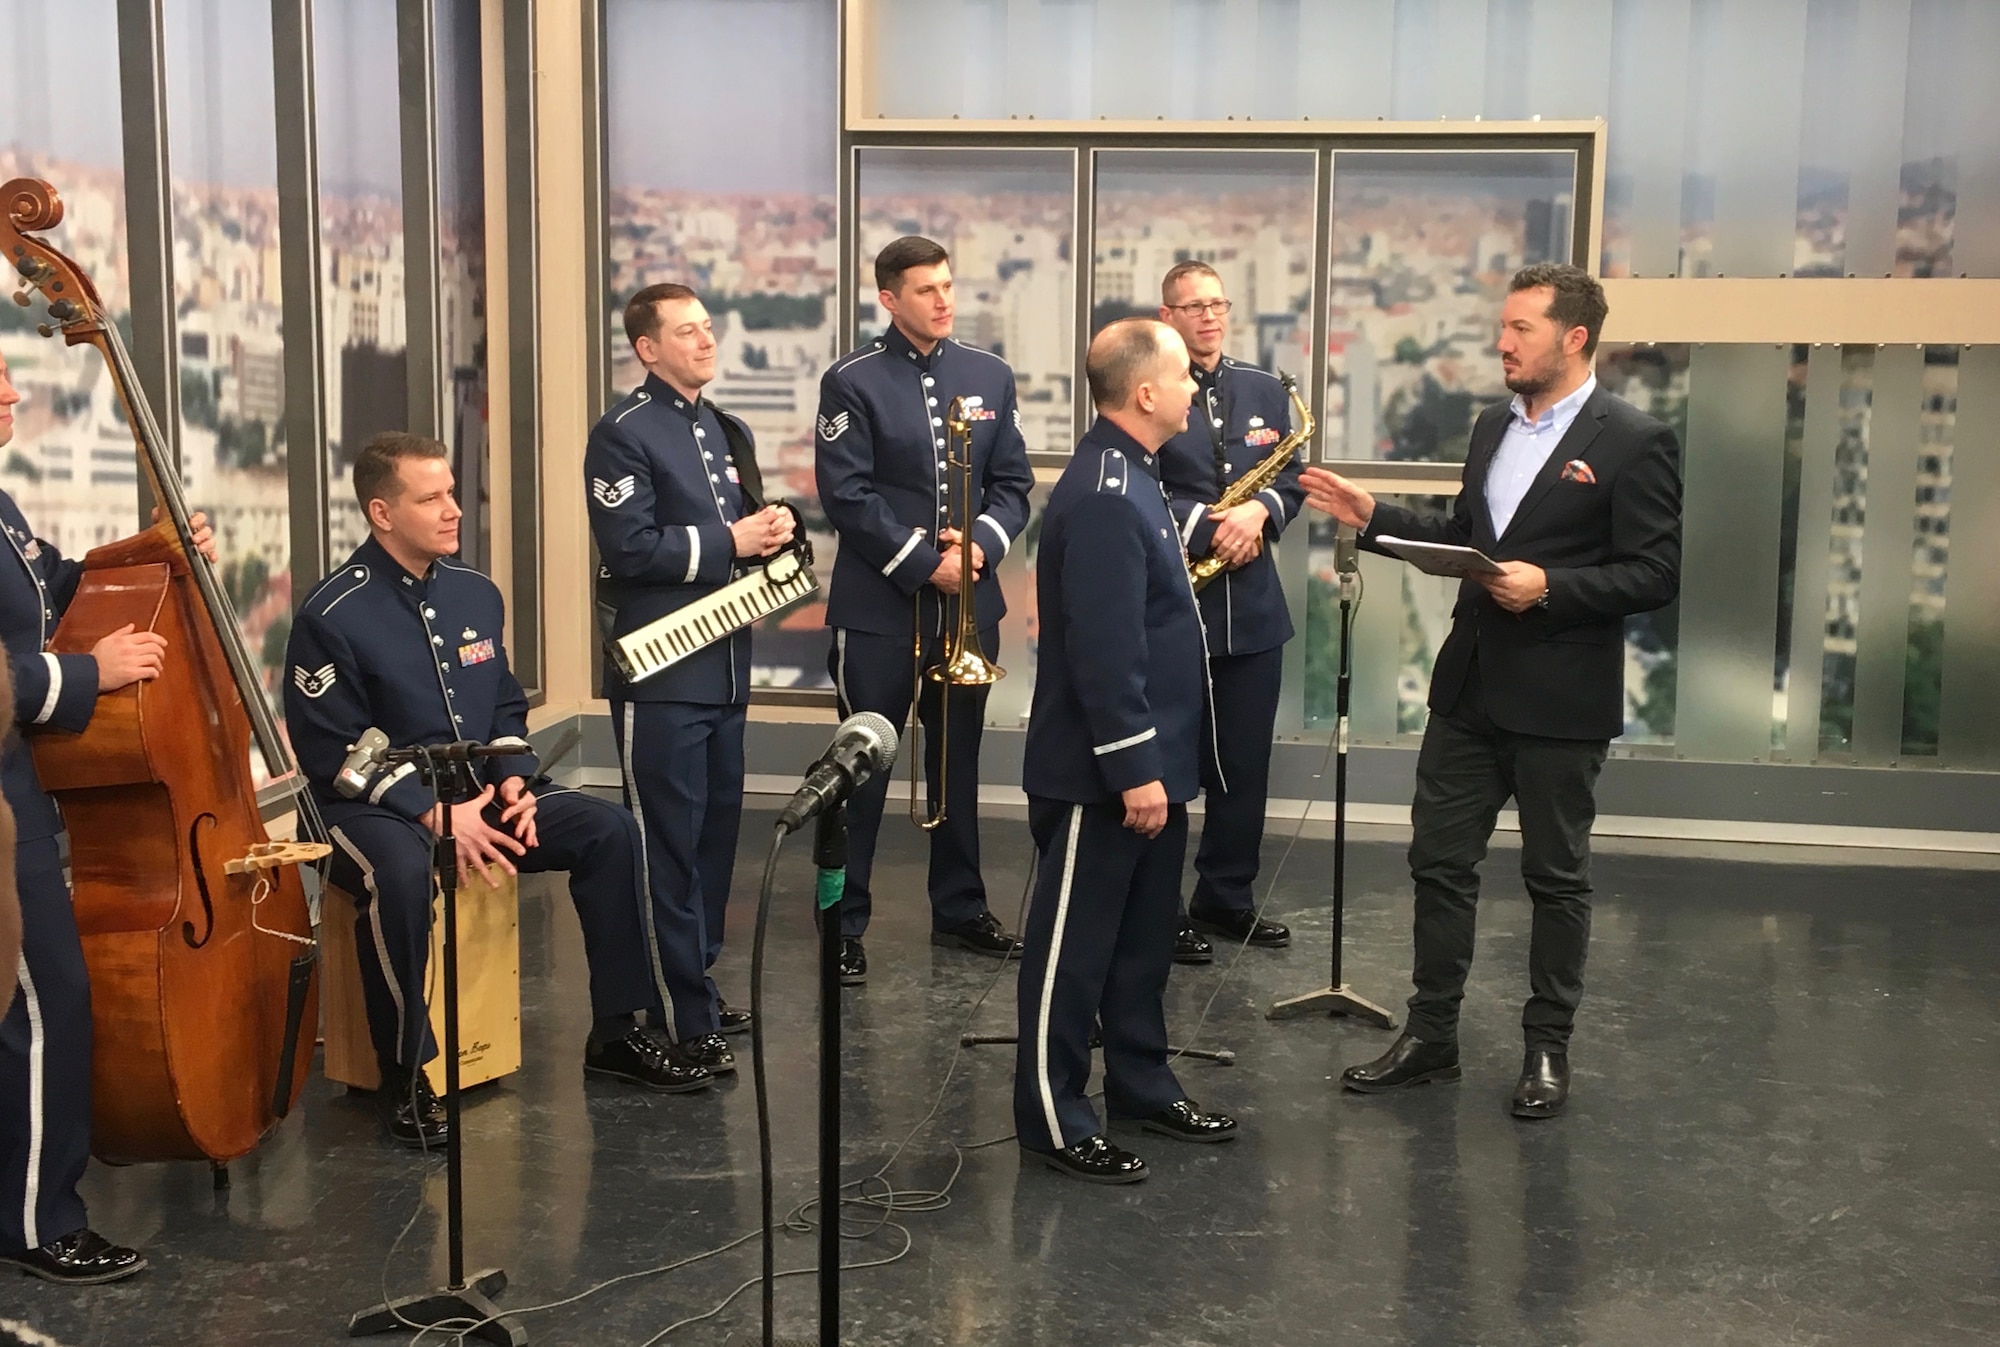 The U.S. Air Forces in Europe Band Commander, Lt. Col. Don Schofield, speaks to the Radio Television of Kosovo morning show host during a live broadcast in Pristina, Kosovo, Feb. 16, 2018. The band was in Kosovo to celebrate the 10th anniversary of Kosovo independence. (U.S. Air Force photo by Maj. Tristan Hinderliter)